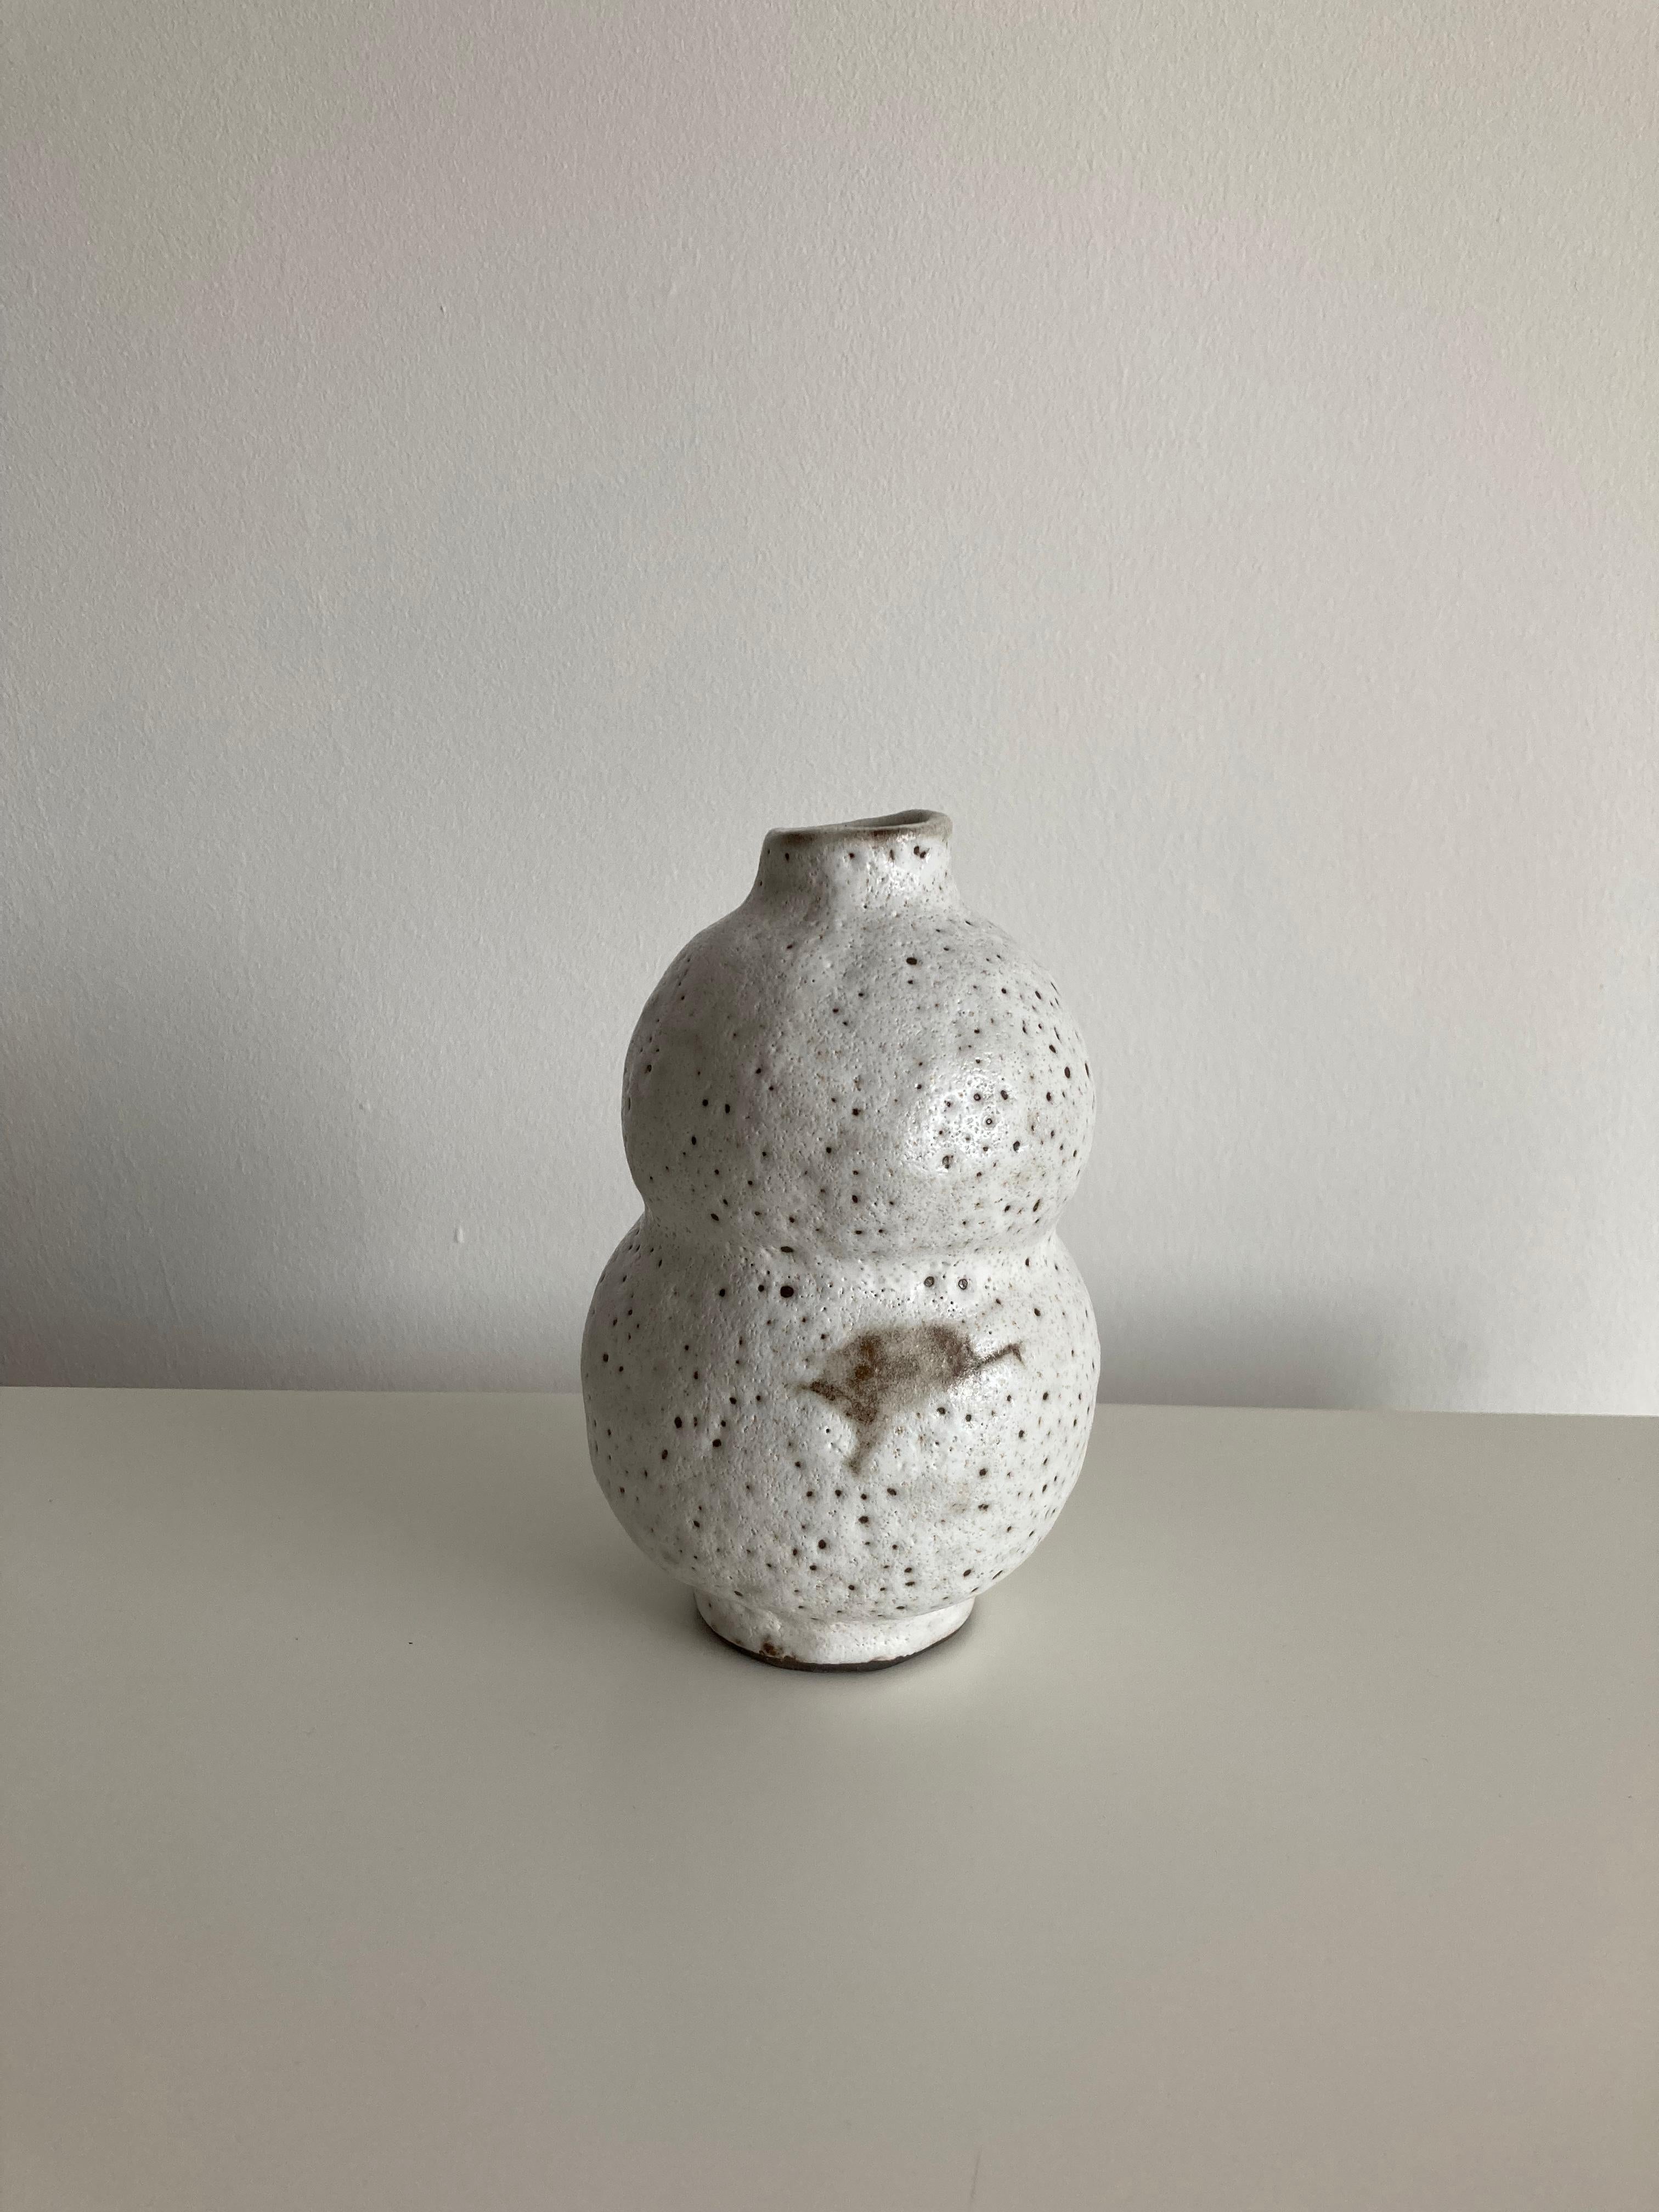 No.94 stoneware sculpture, Tonfisk by Ciona Lee 
One of a kind
Dimensions: Ø 10 x H 16 cm
Materials: Black stoneware, frost white glaze
Variations of size and colour available

Tonfisk is the ceramic practice by Ciona Lee, a Korean-Italian